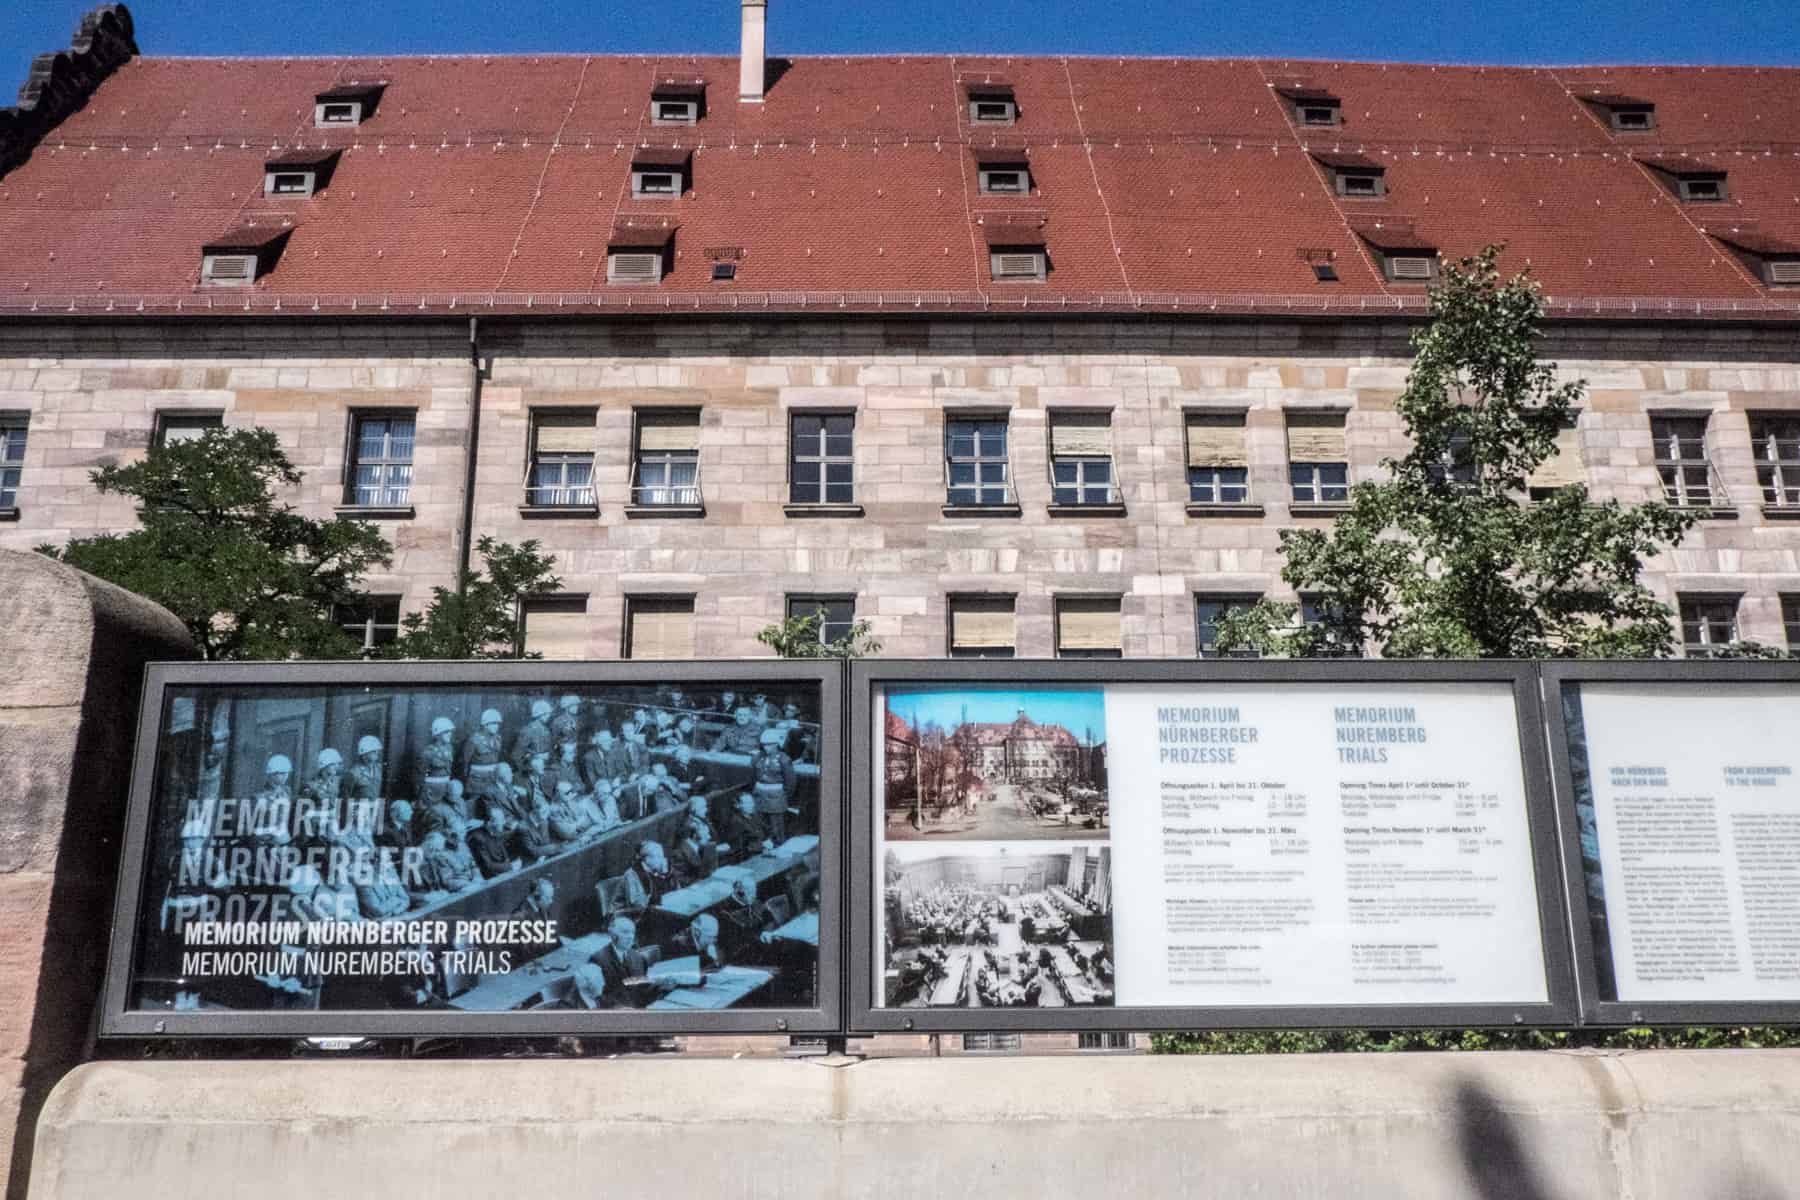 The red-roofed exterior and information boards outside the Palace of Justice where the historic Nuremberg Trails took place